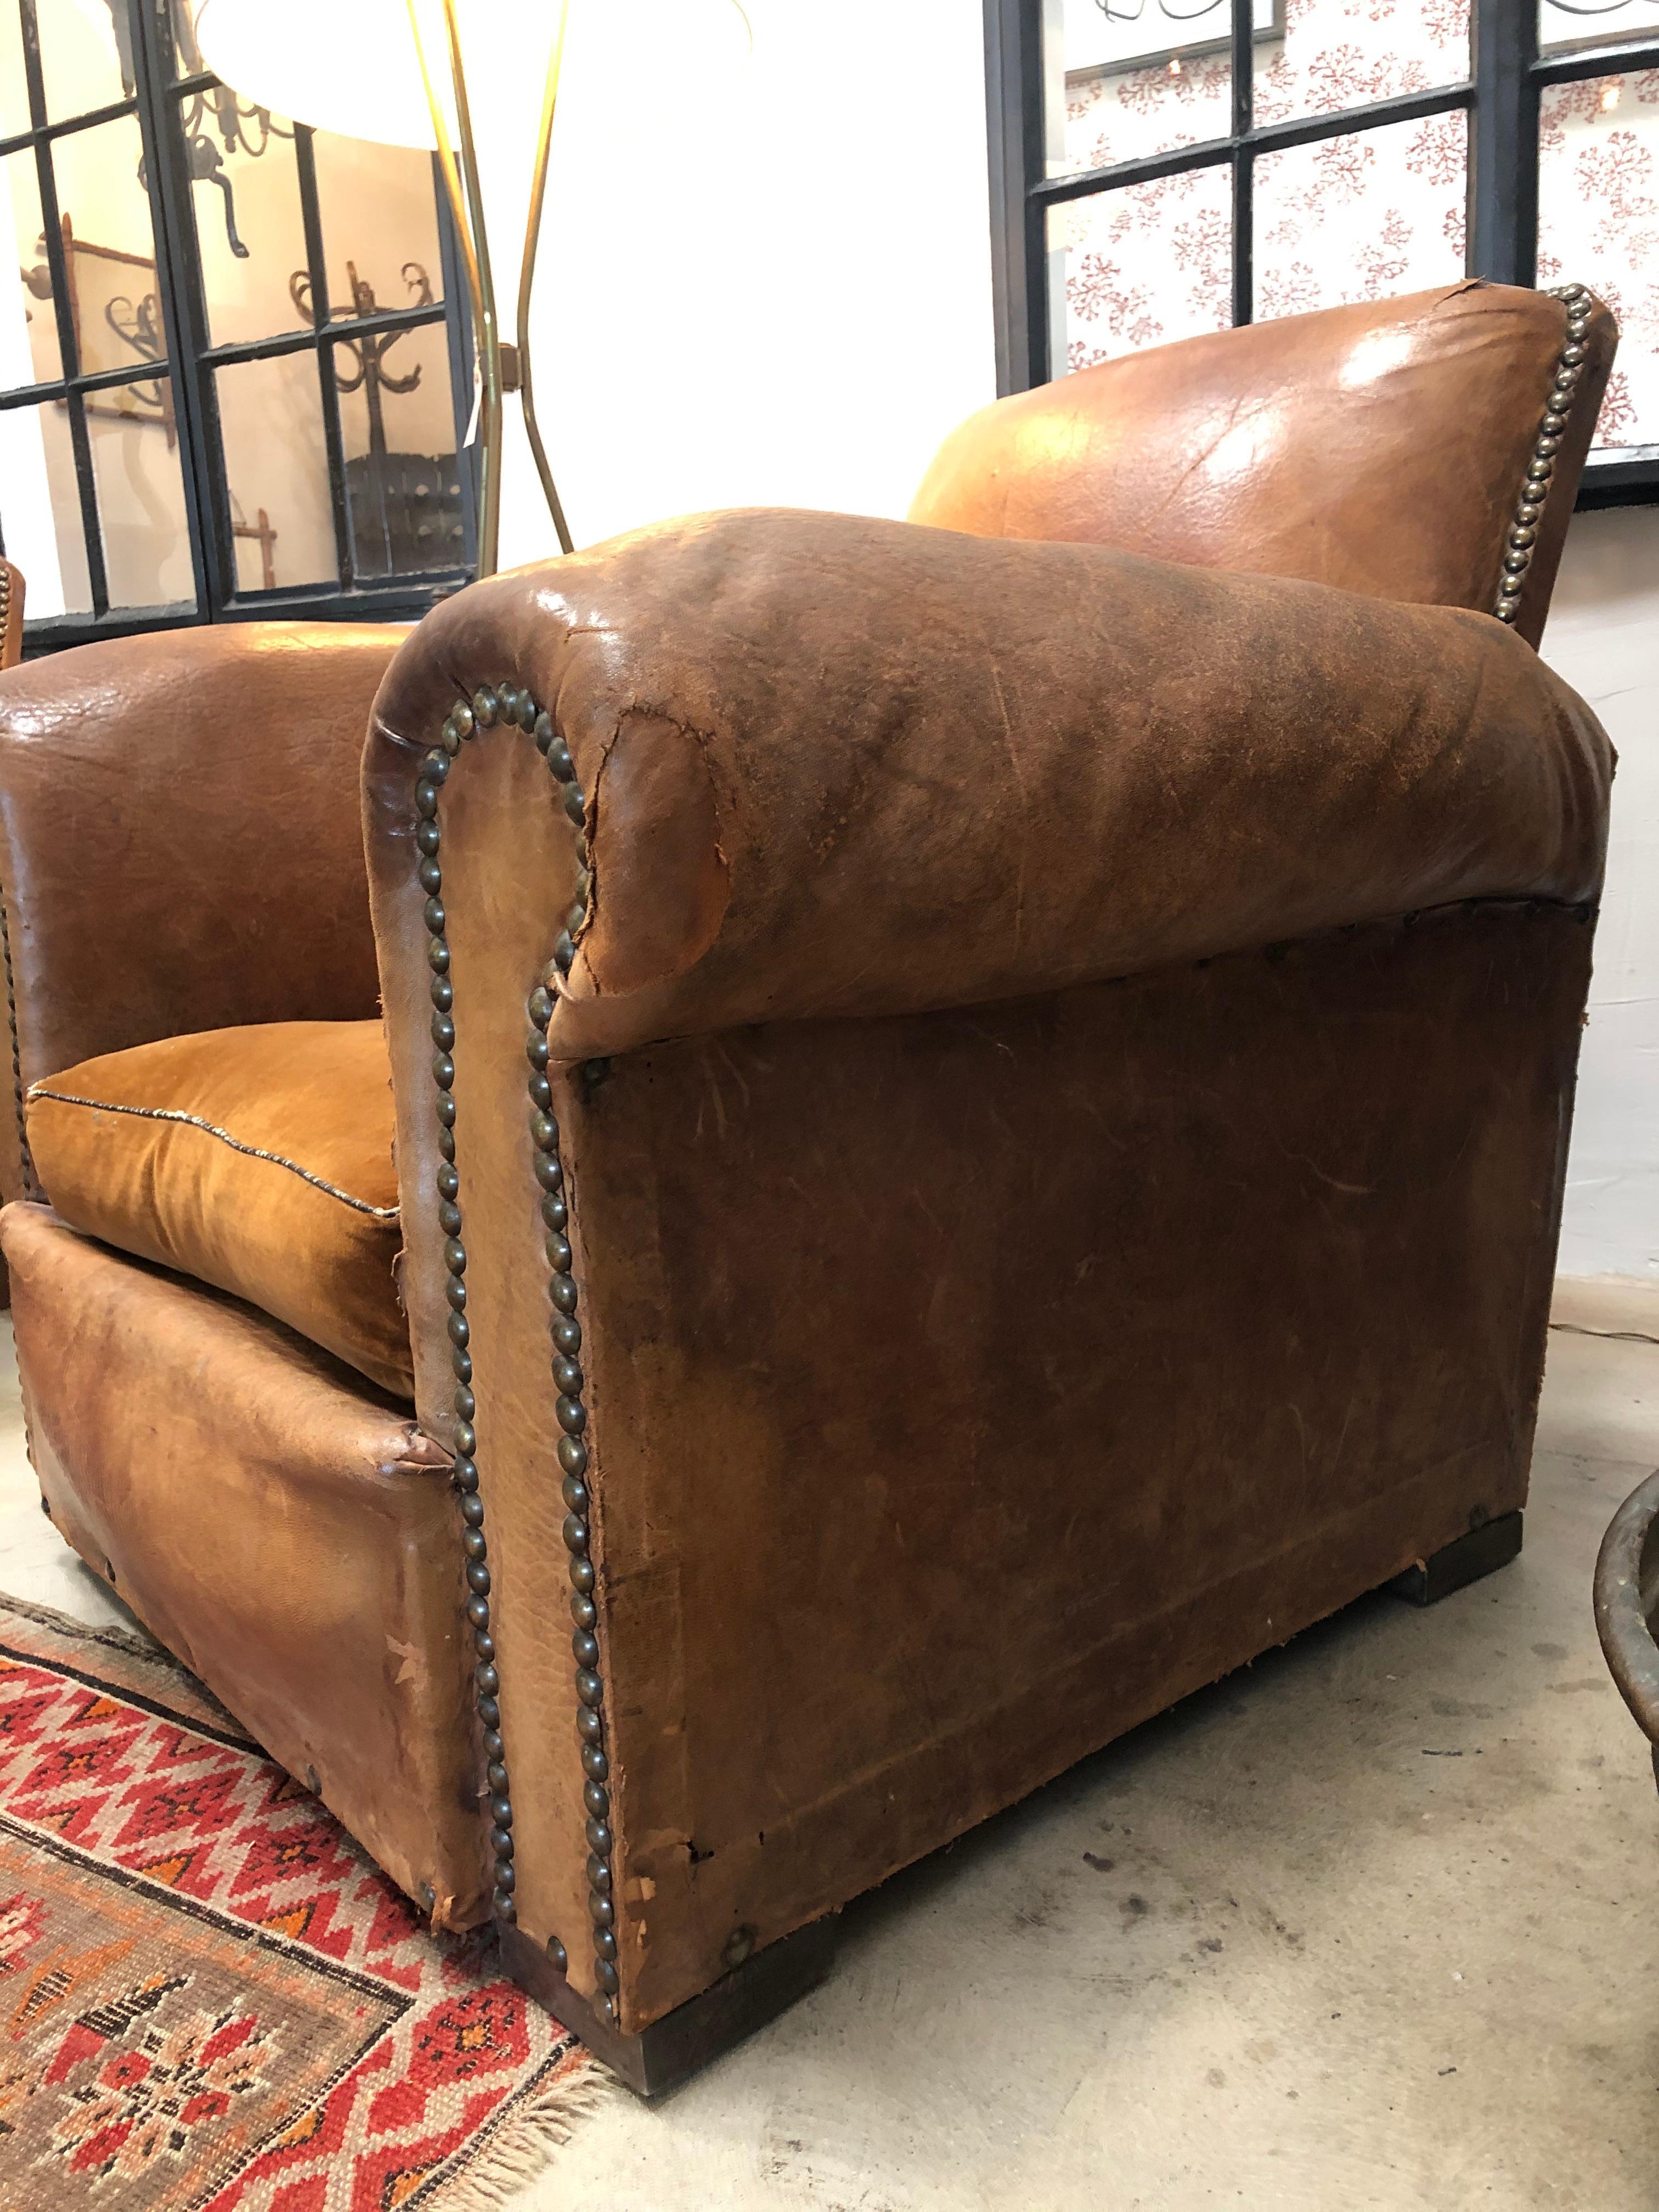 Vintage leather club chair, pair with velvet seats. Detailed with nail studding. Camel leather is soft and velvet cushion fluffed. This set is from the early 1900s between 1920-1940. A great pair of chairs for any space. Completely comfortable, no